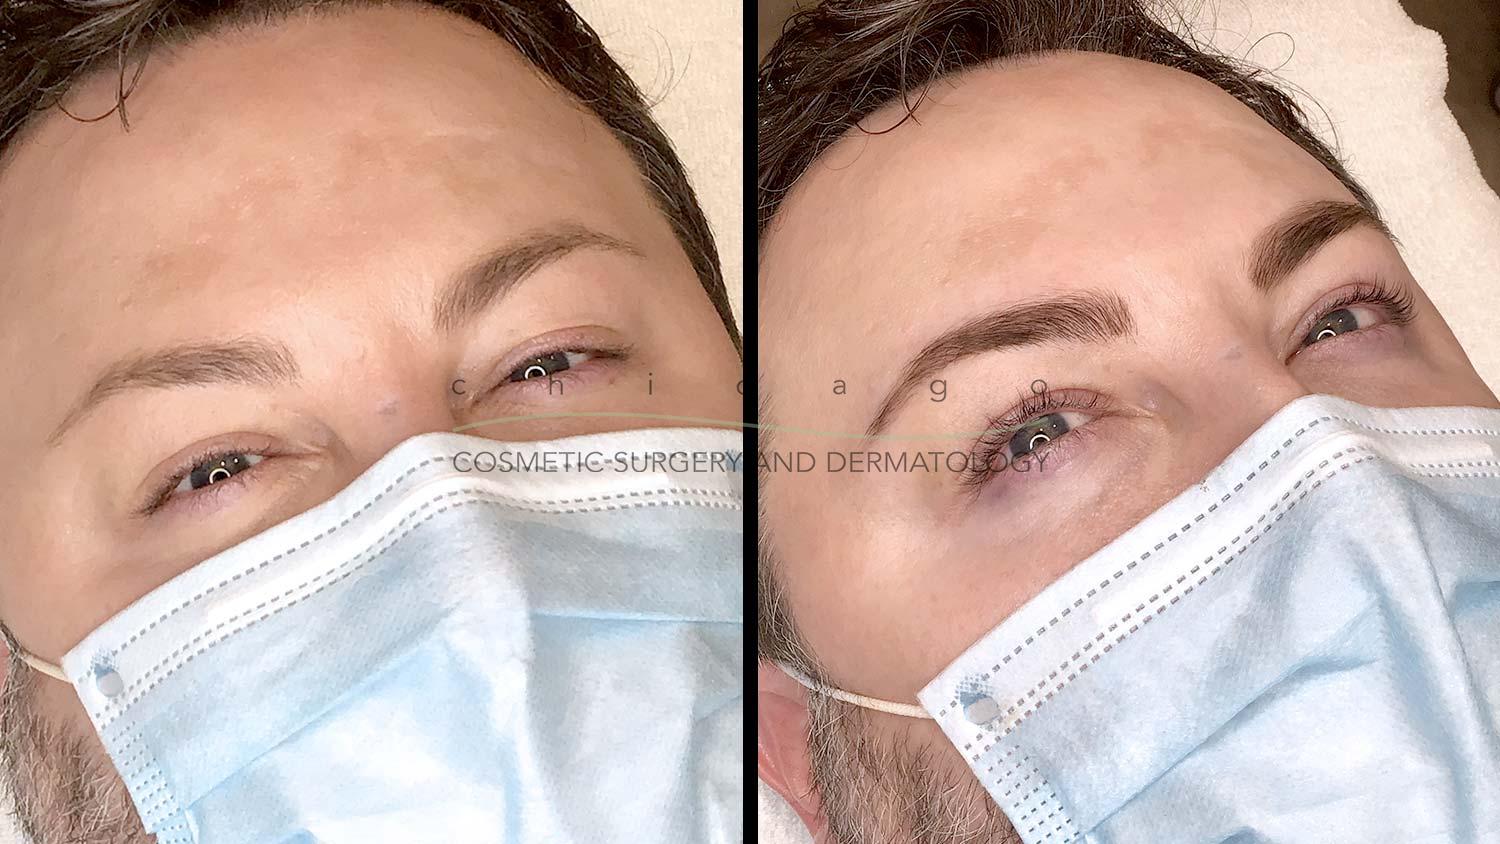 eyelash lift and tint before and after